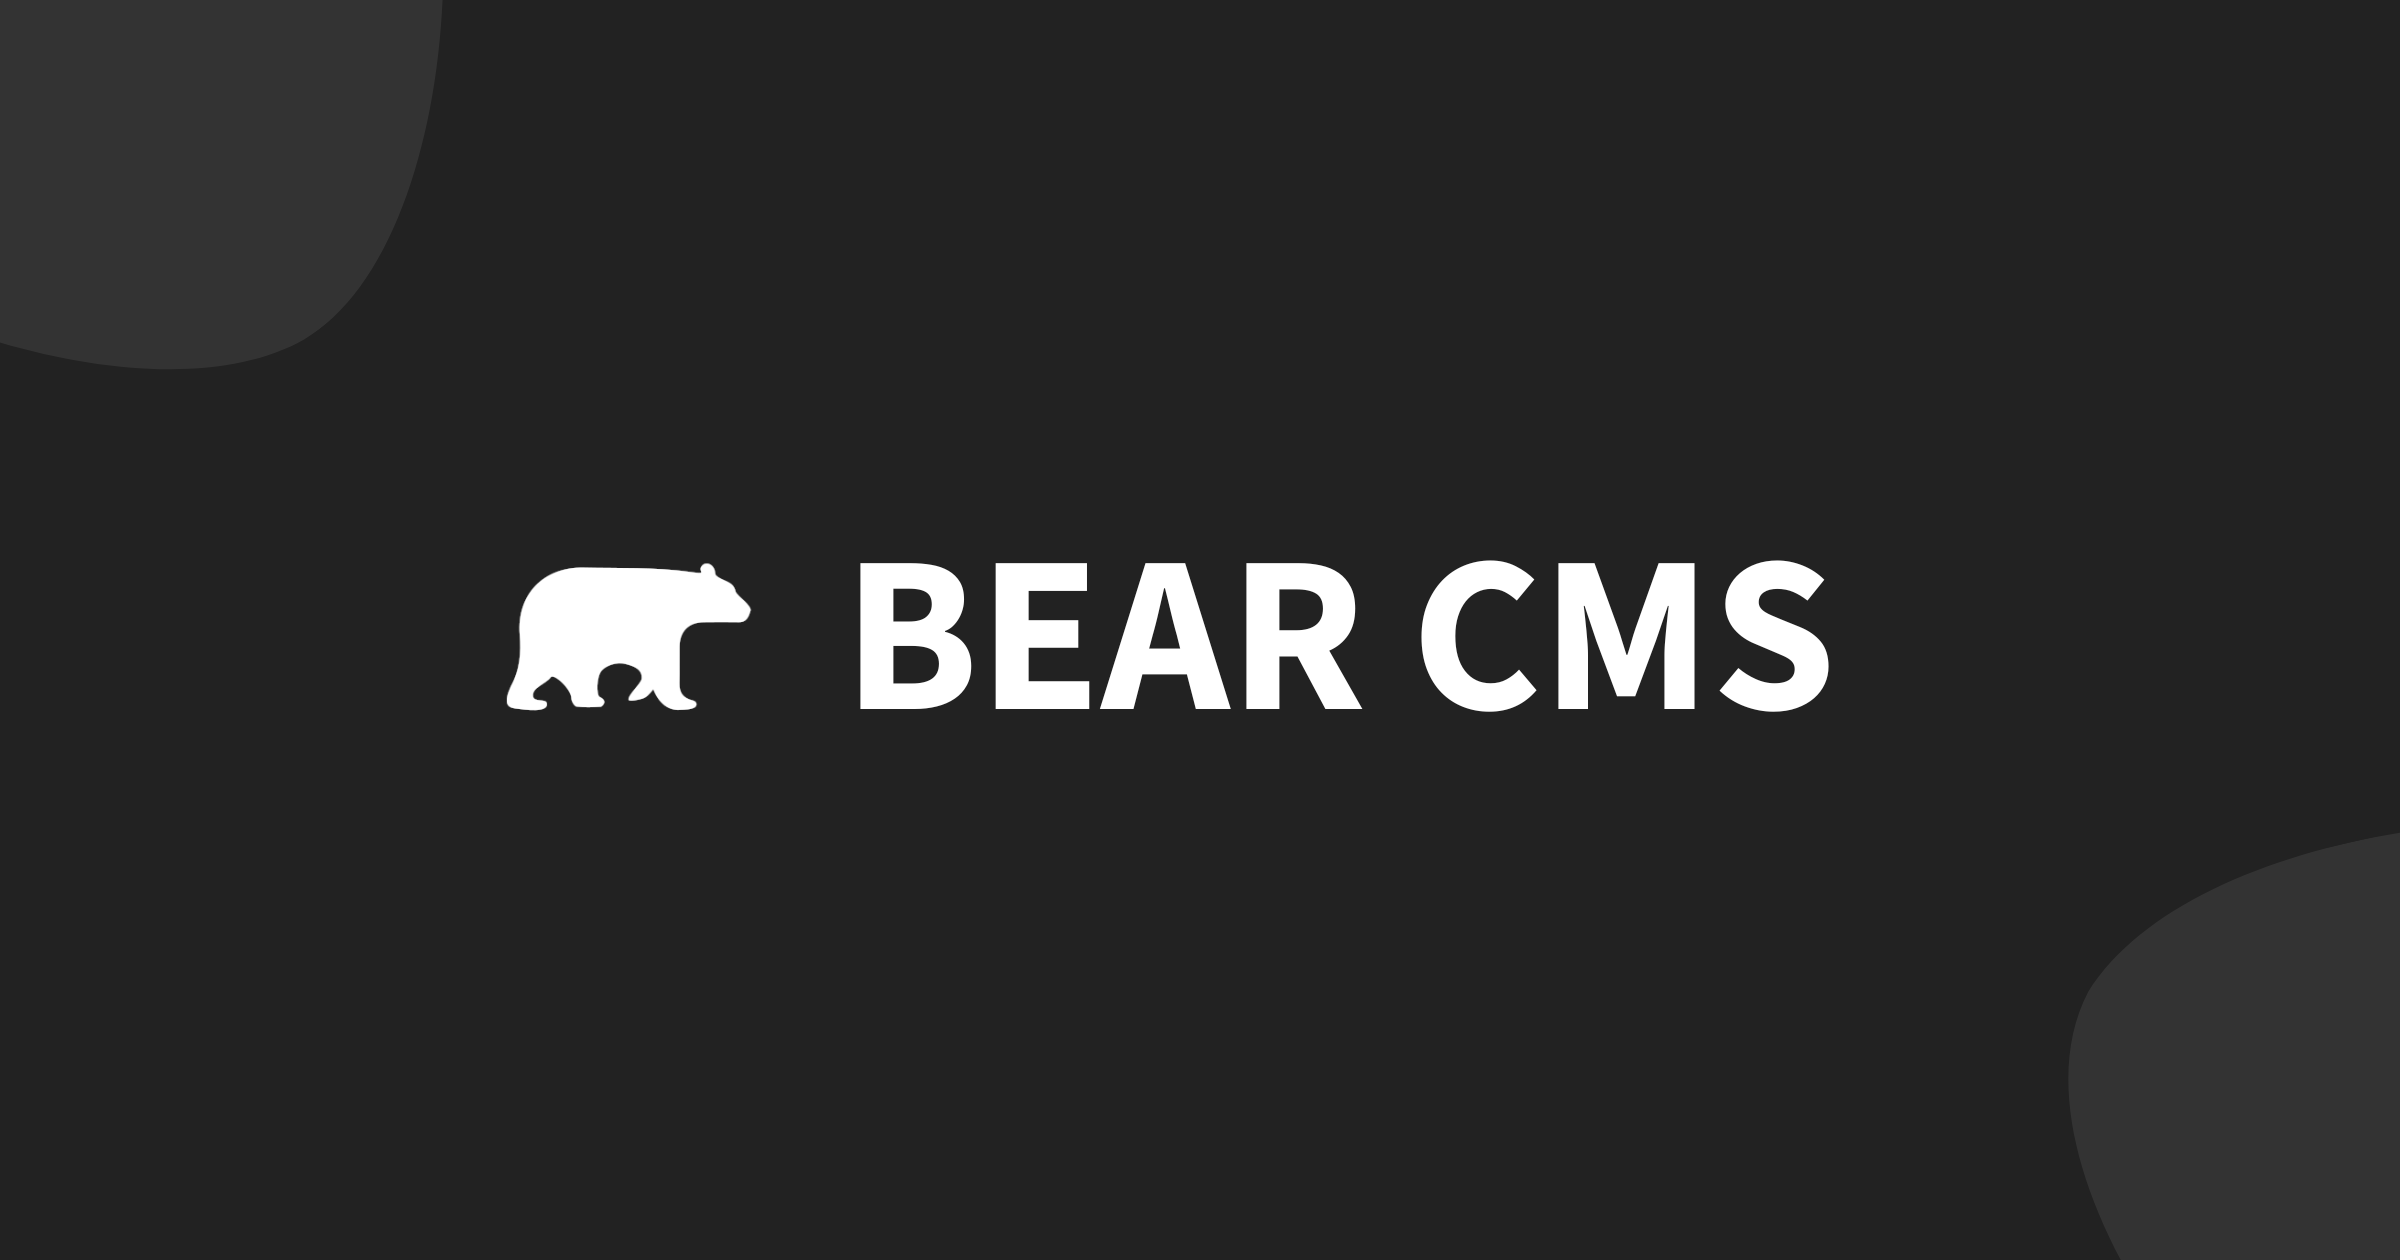 Bear CMS is a content management system as a service